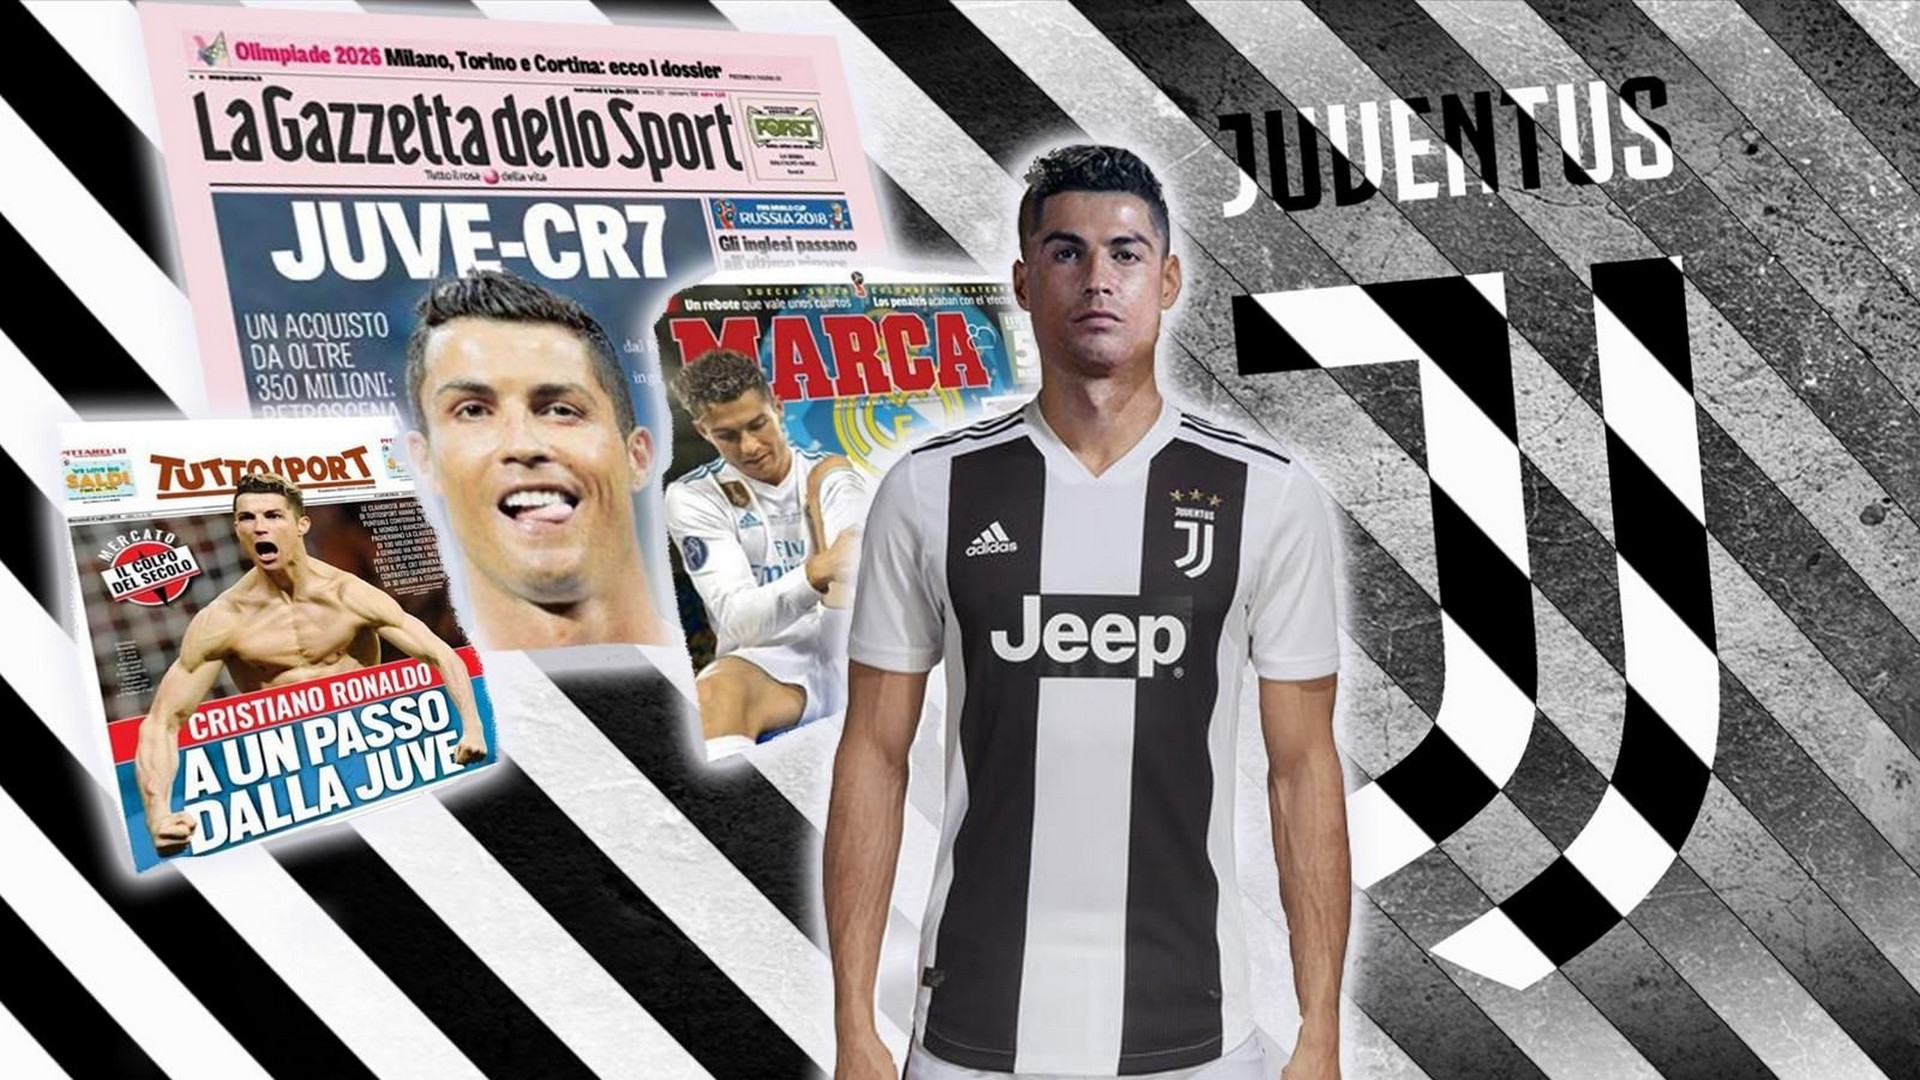 Wallpaper HD C Ronaldo Juventus with image resolution 1920x1080 pixel. You can make this wallpaper for your Desktop Computer Backgrounds, Mac Wallpapers, Android Lock screen or iPhone Screensavers